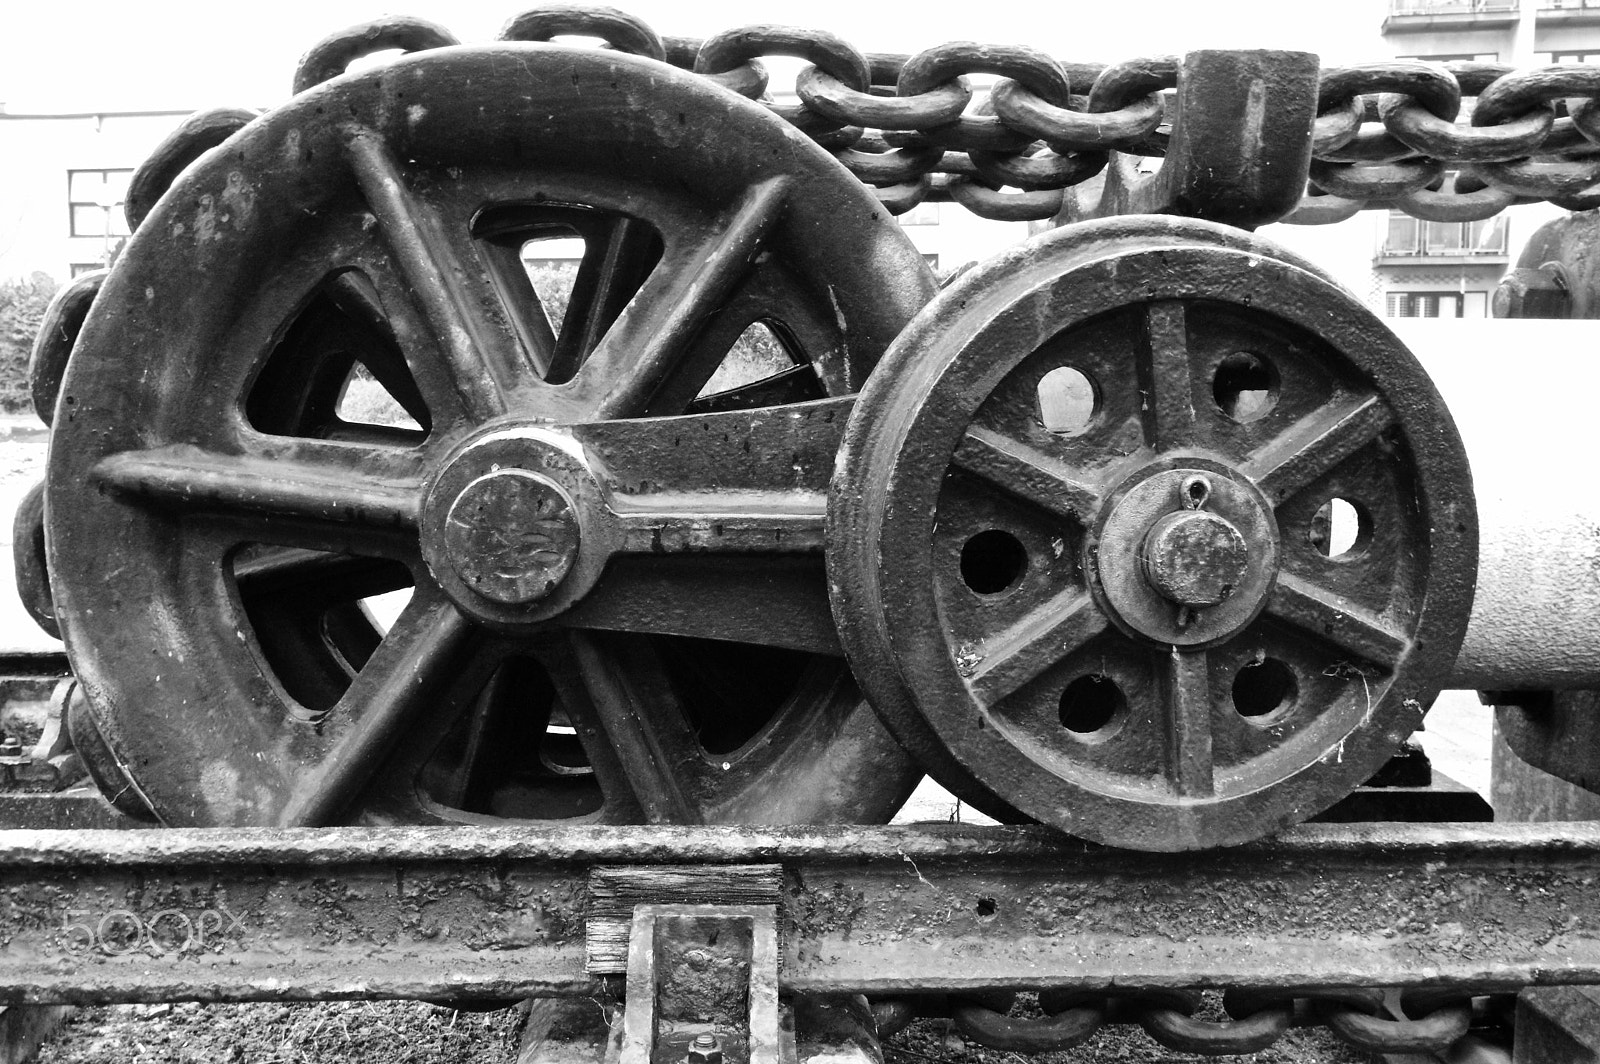 Pentax K-3 sample photo. Millwall dock pulley photography